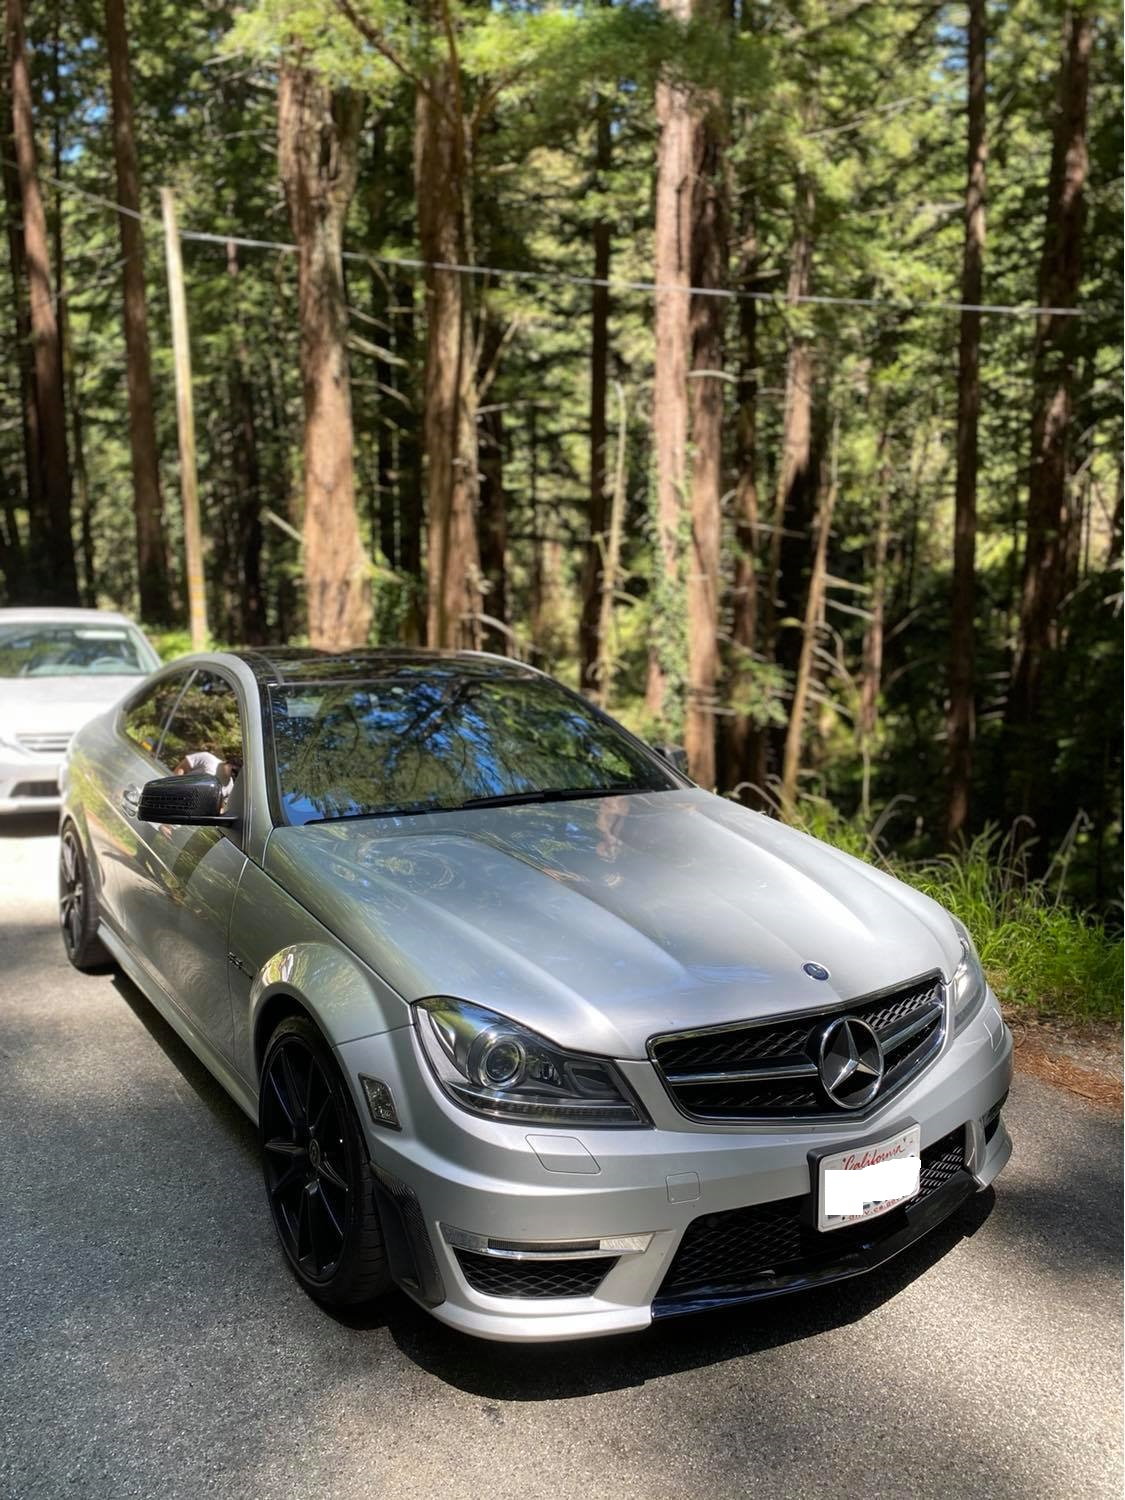 2015 Mercedes-Benz C63 AMG - FOR SALE 2015 Mercedes C63 AMG Coupe Iridium Silver **LOW MILES** - Used - VIN WDDGJ7HB9FG368547 - 20,528 Miles - 8 cyl - 2WD - Automatic - Coupe - Silver - San Francisco, CA 94121, United States